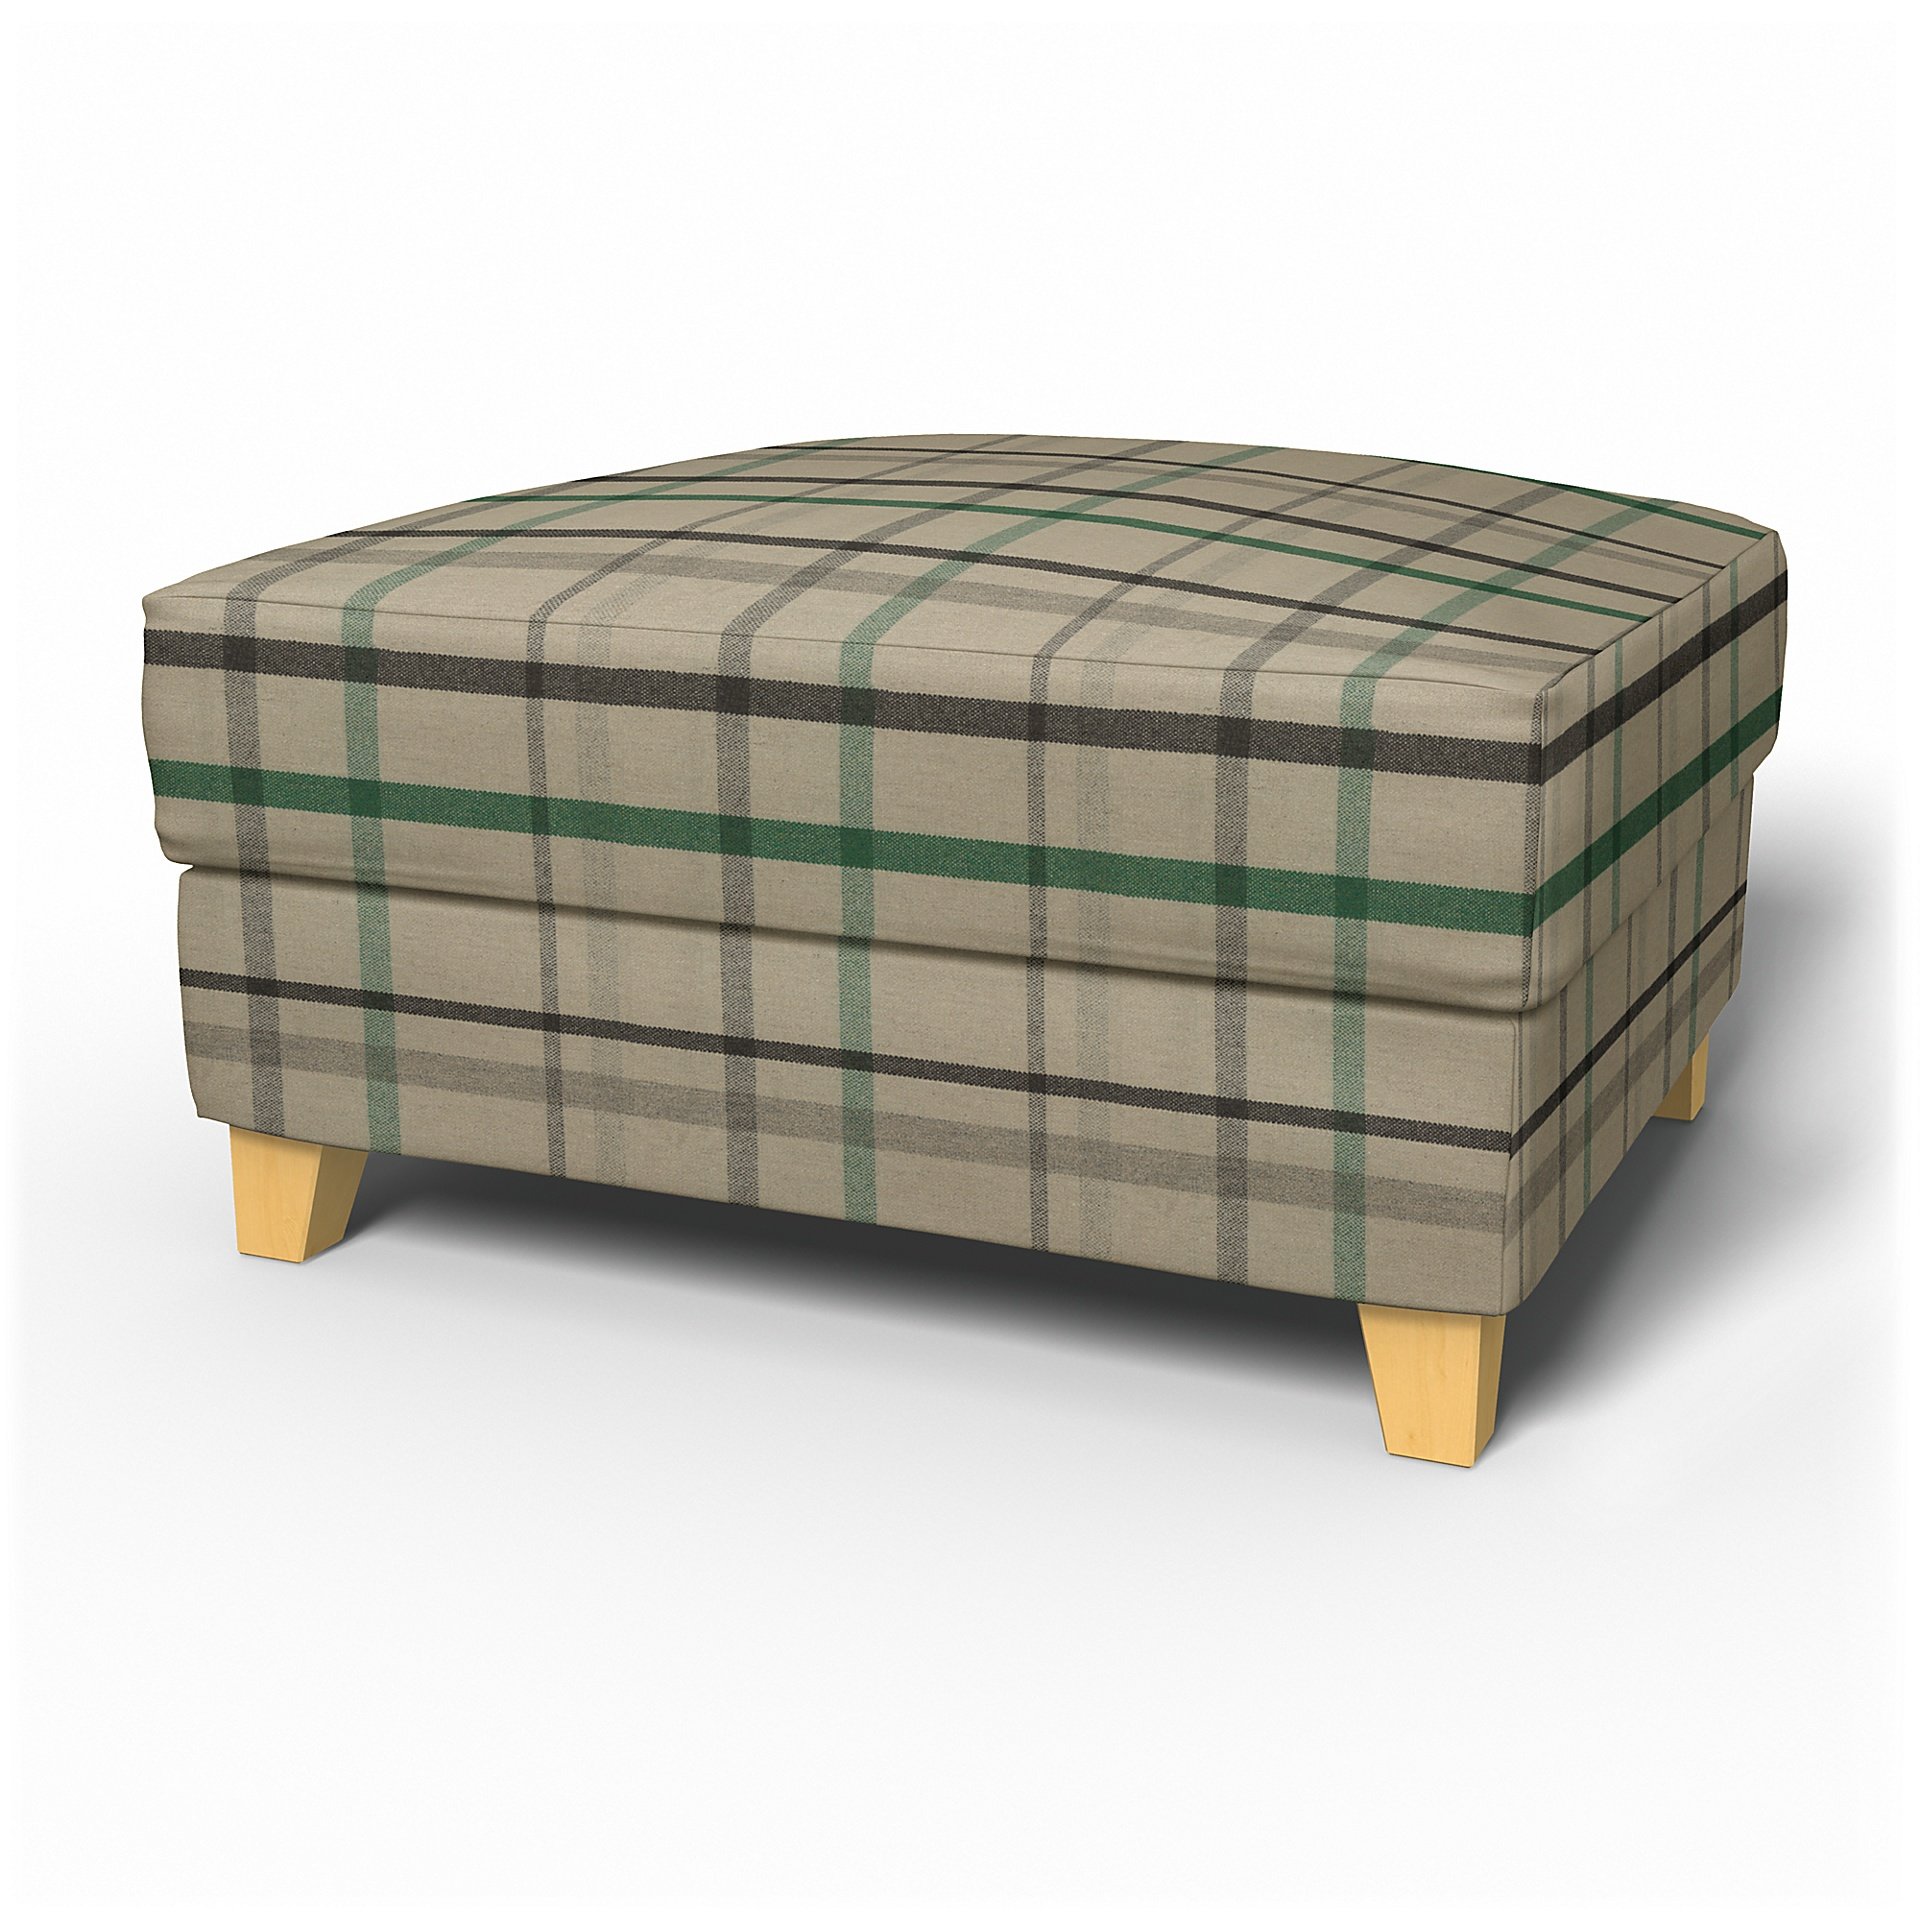 IKEA - Backa Footstool Cover, Forest Glade, Wool - Bemz